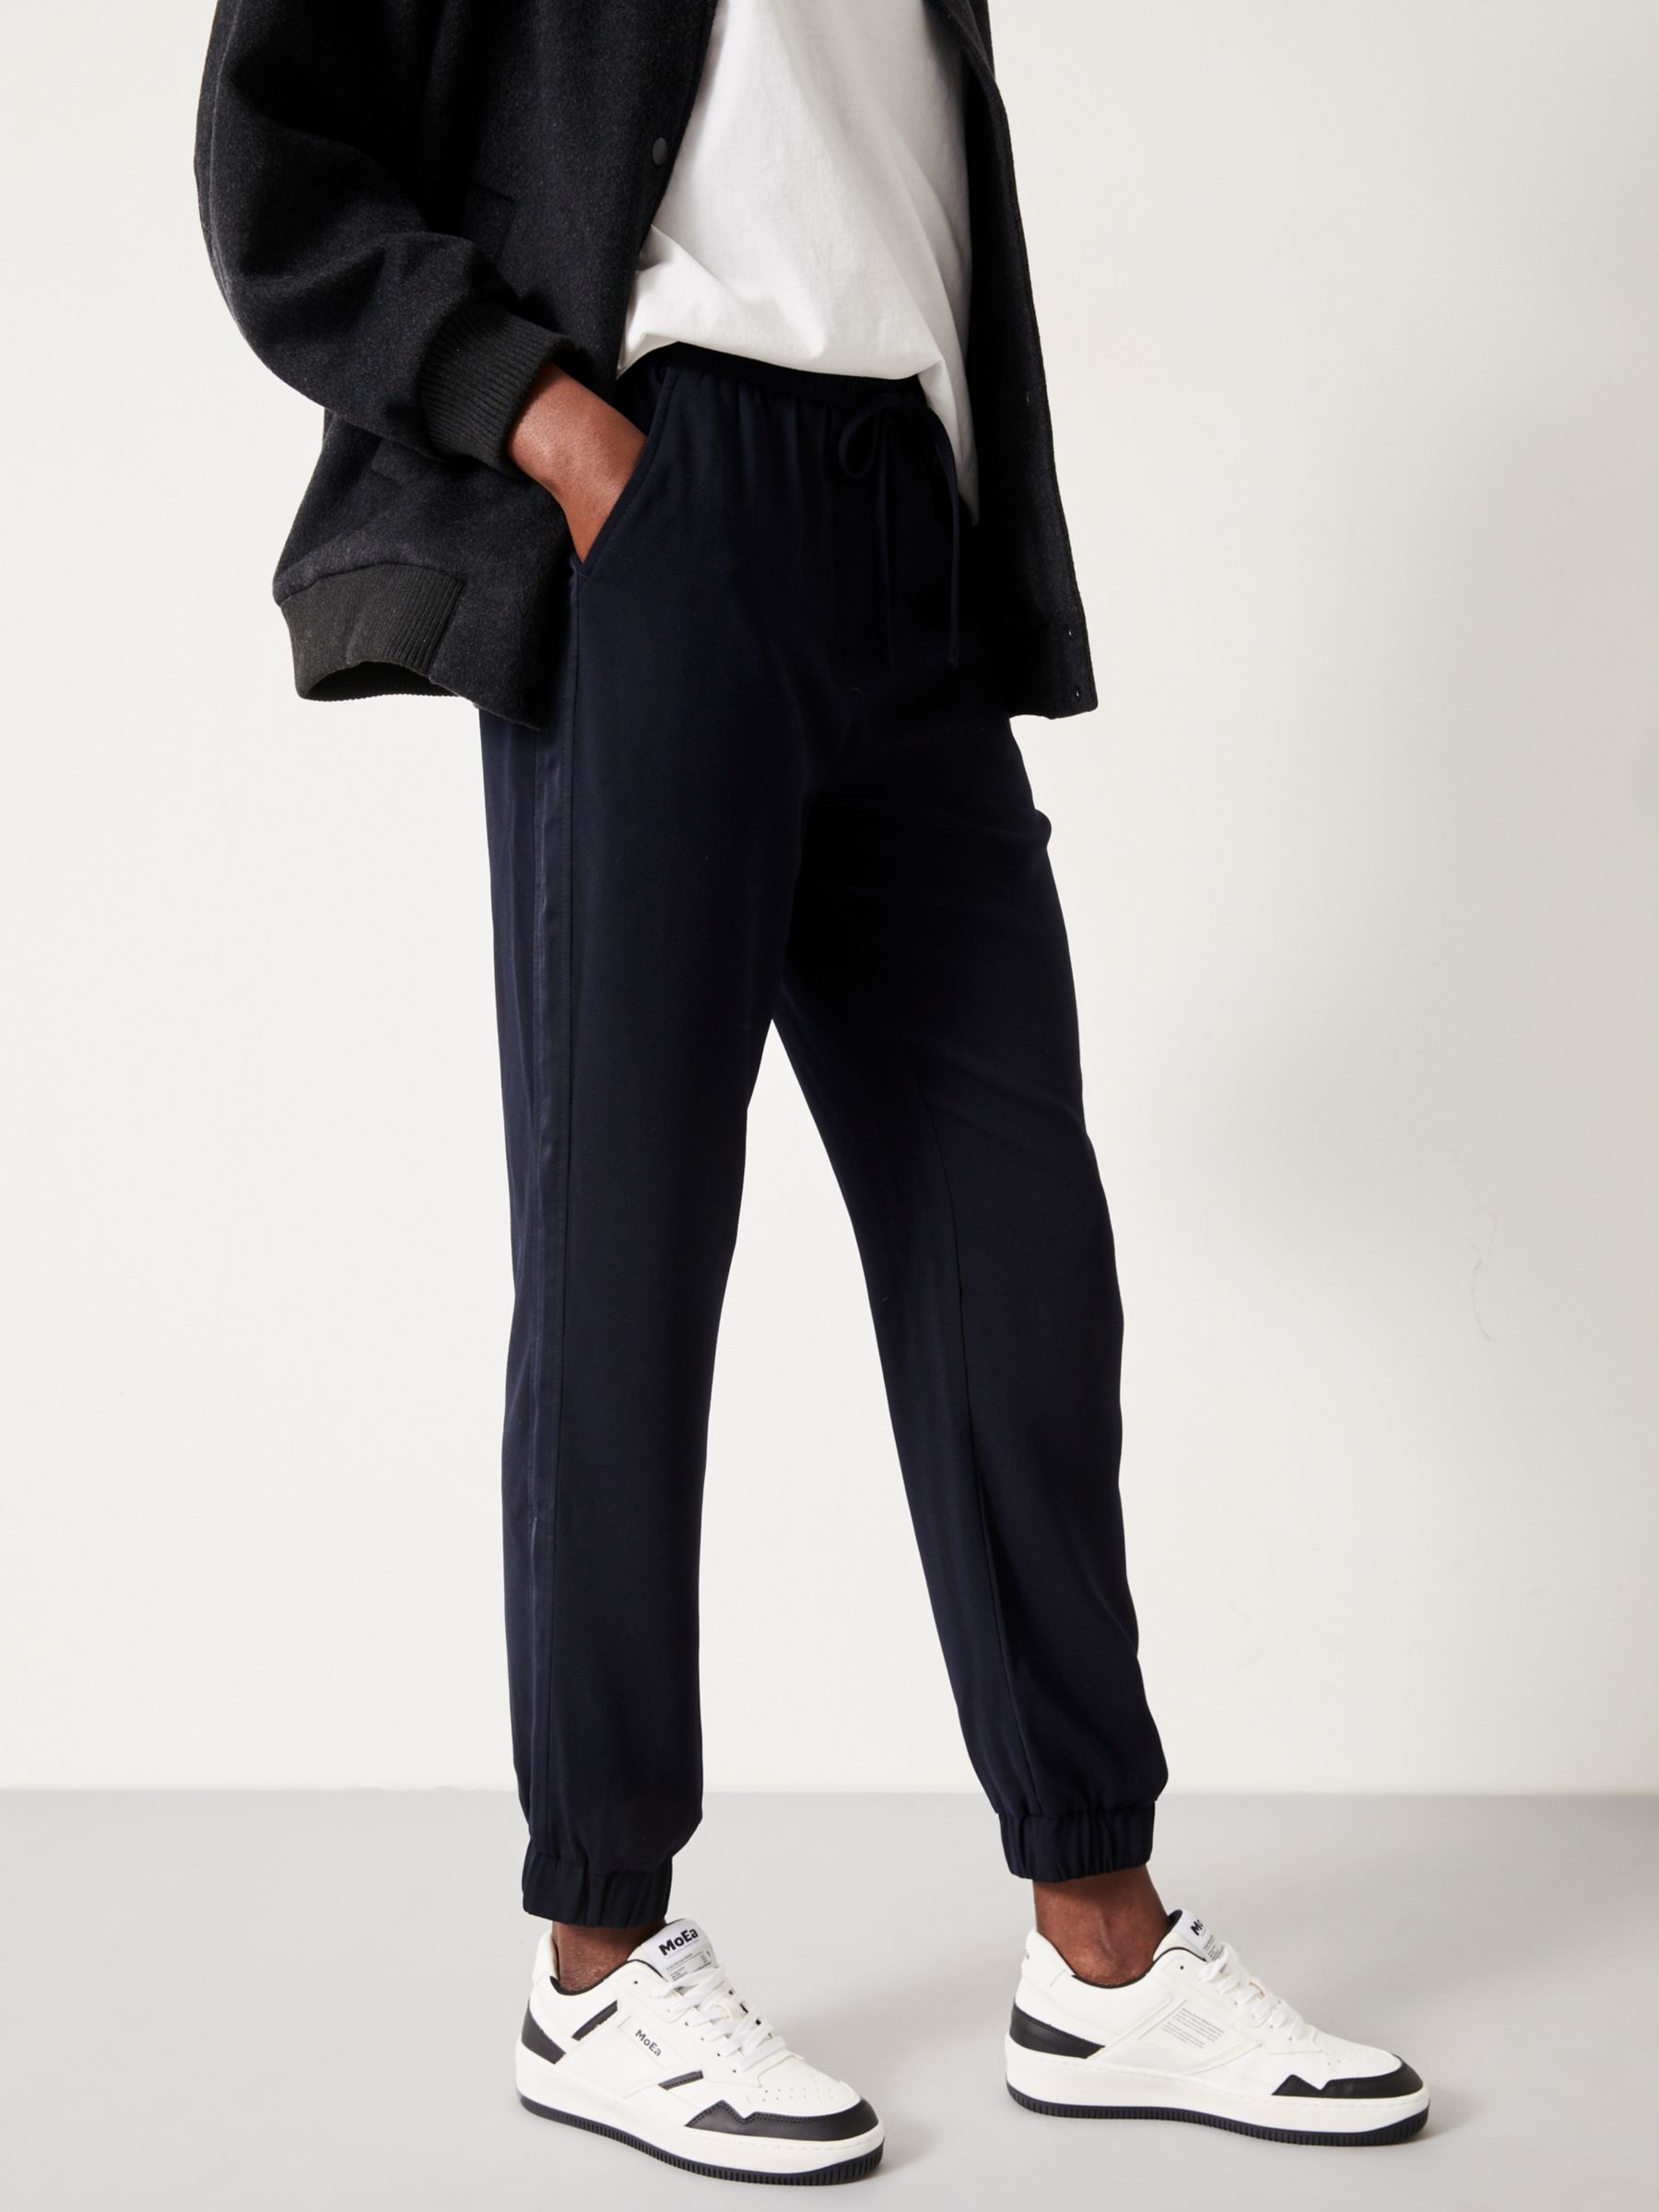 HUSH Crepe Cuffed Trousers, Midnight Navy at John Lewis & Partners